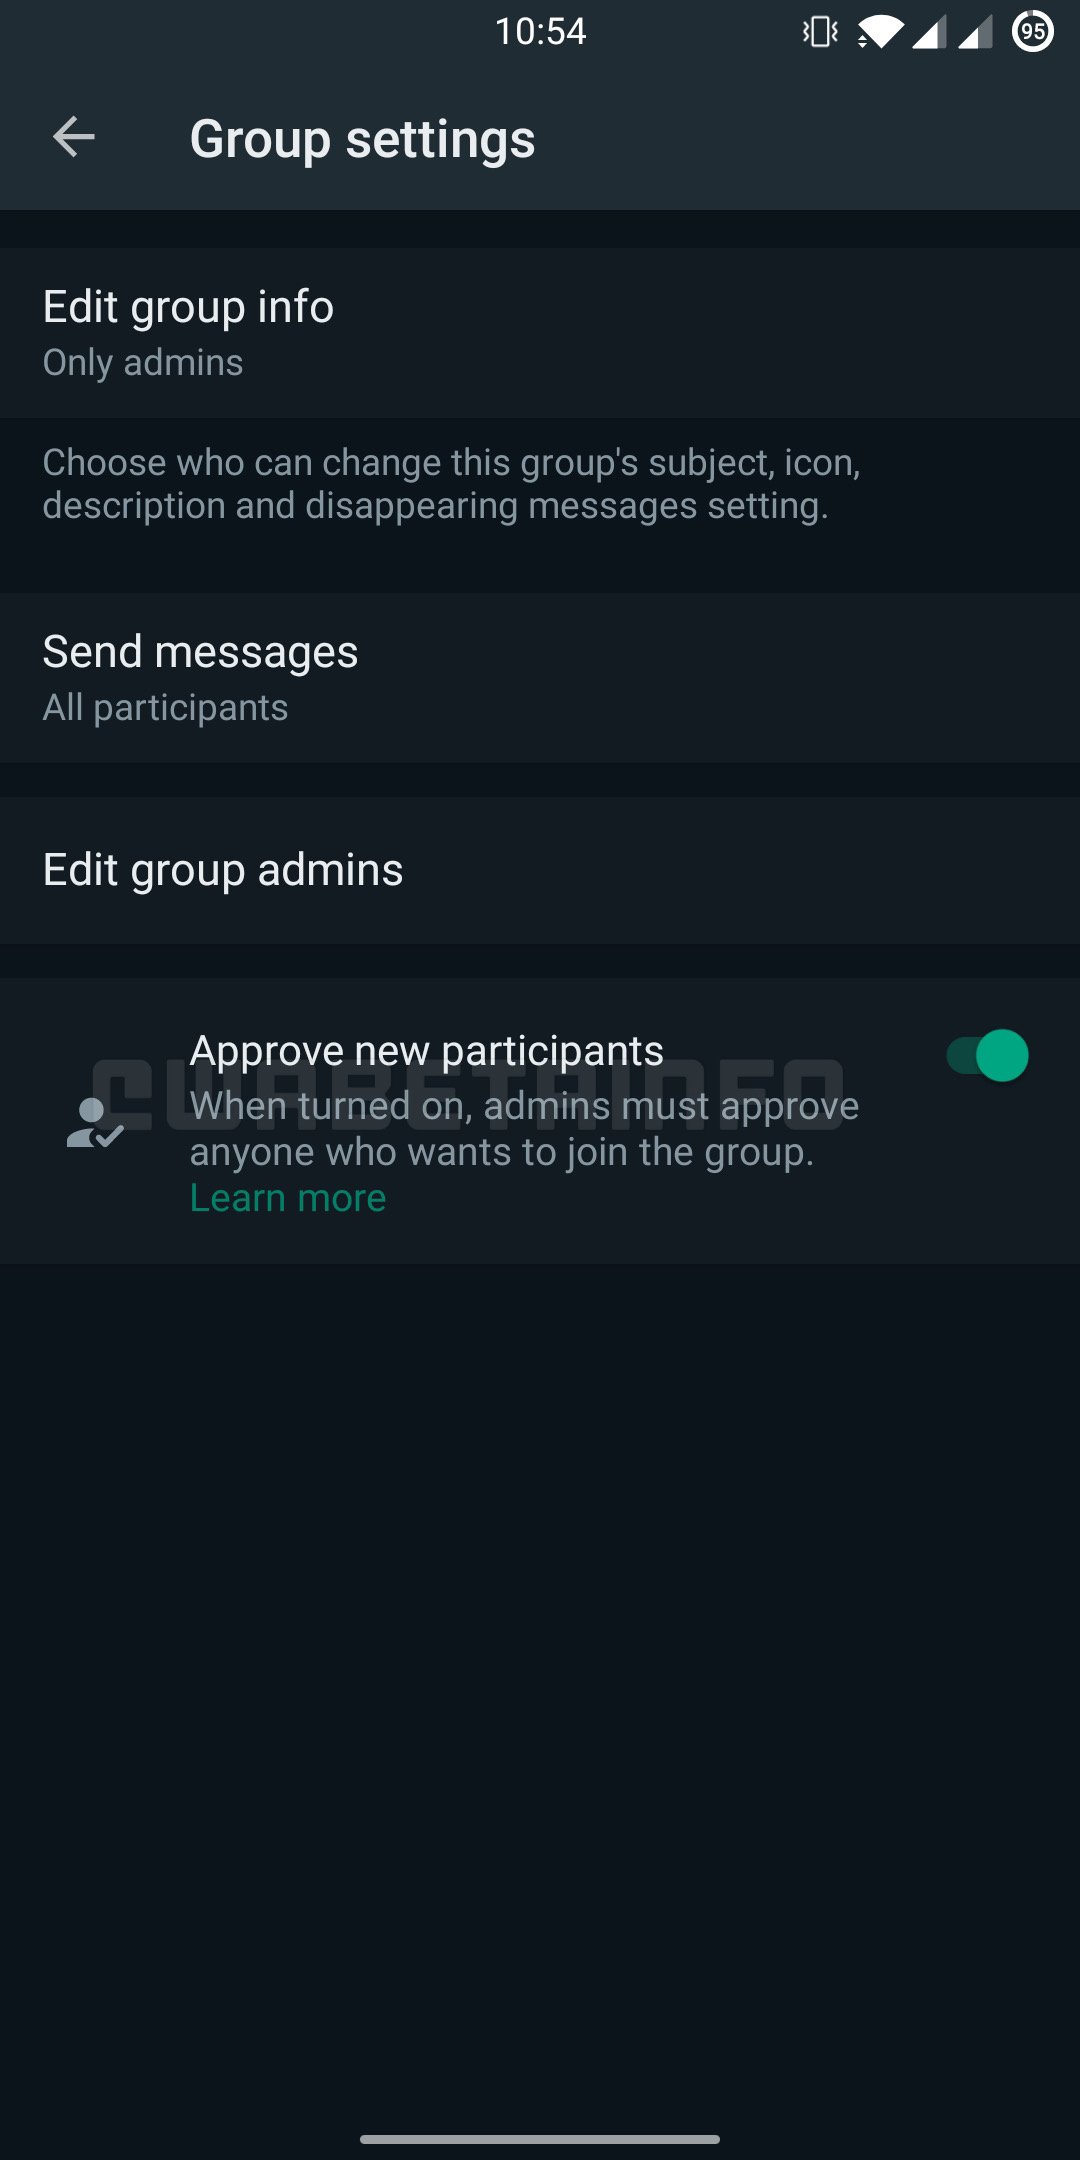 WhatsApp admins to get power to approve people for group chats